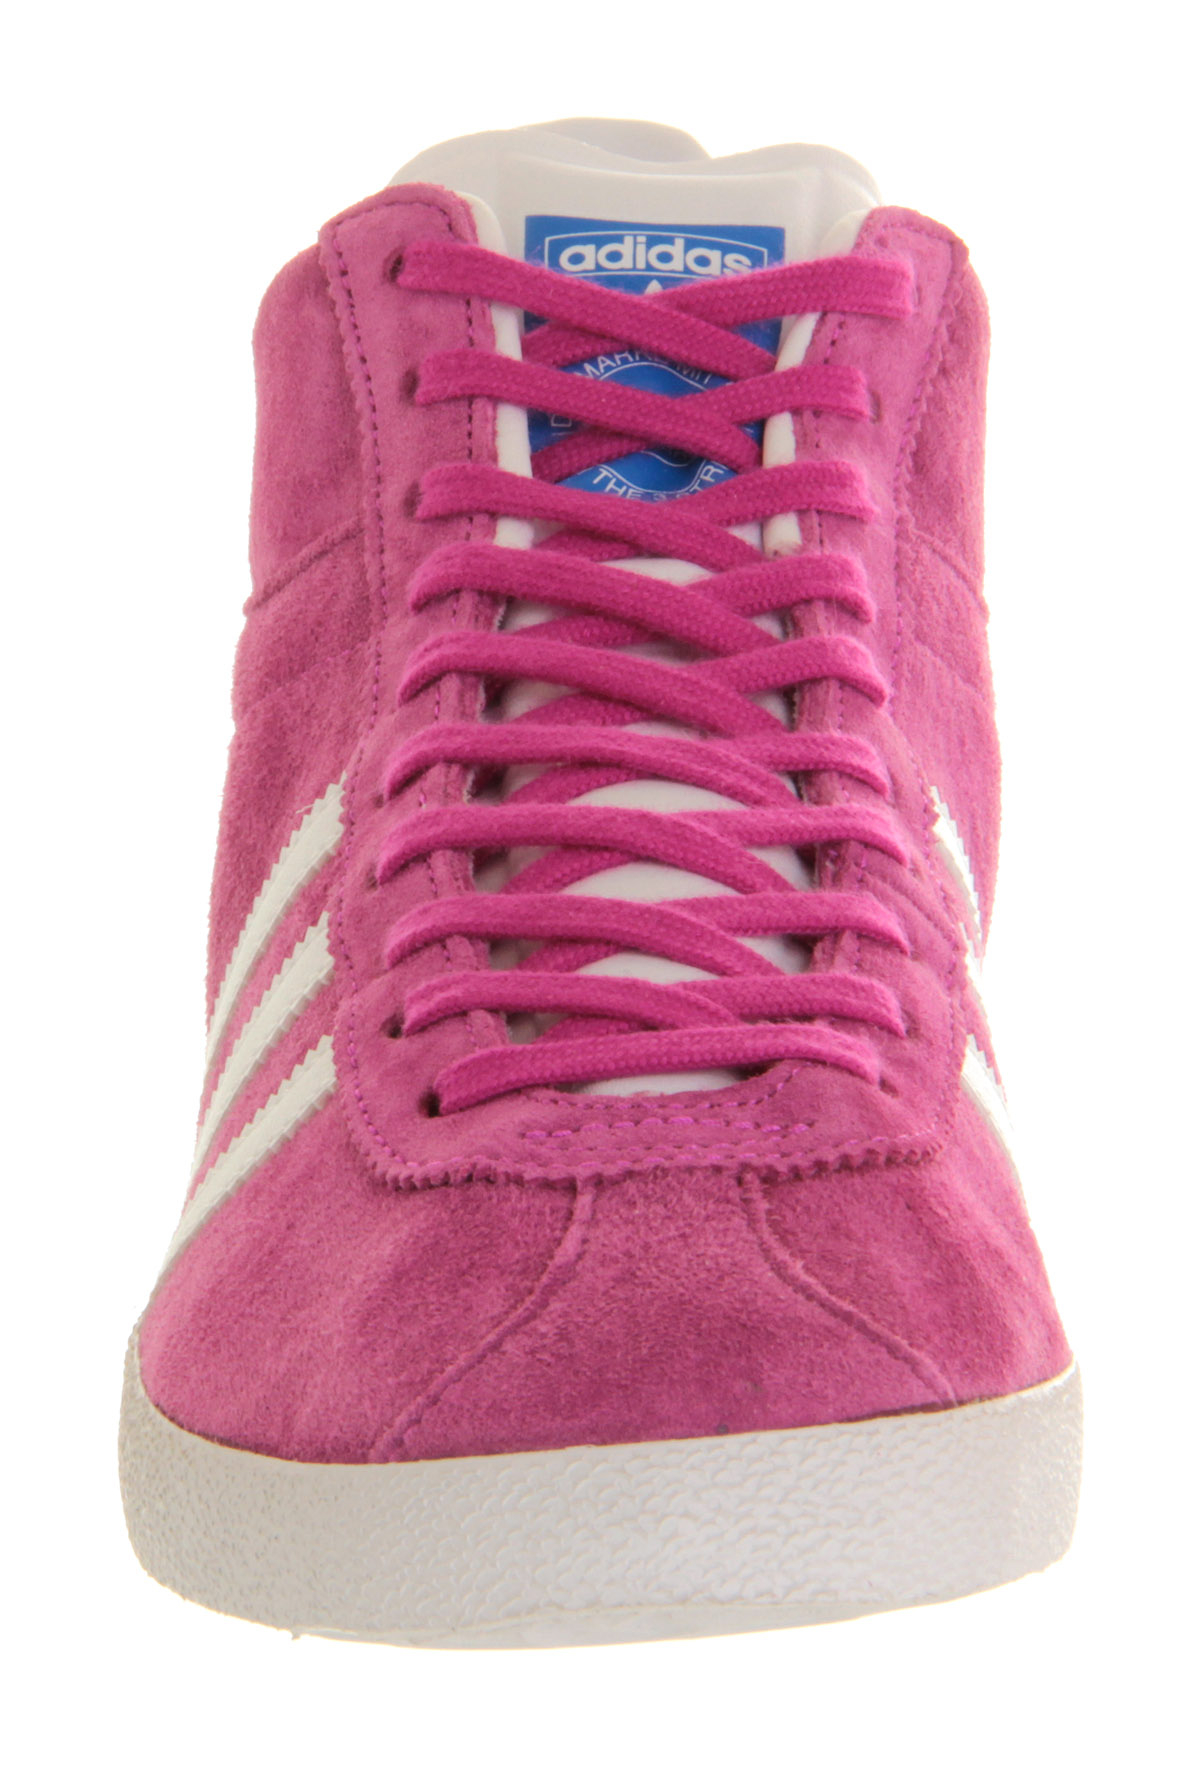 adidas Gazelle Og Mid Trainers in Pink - Lyst